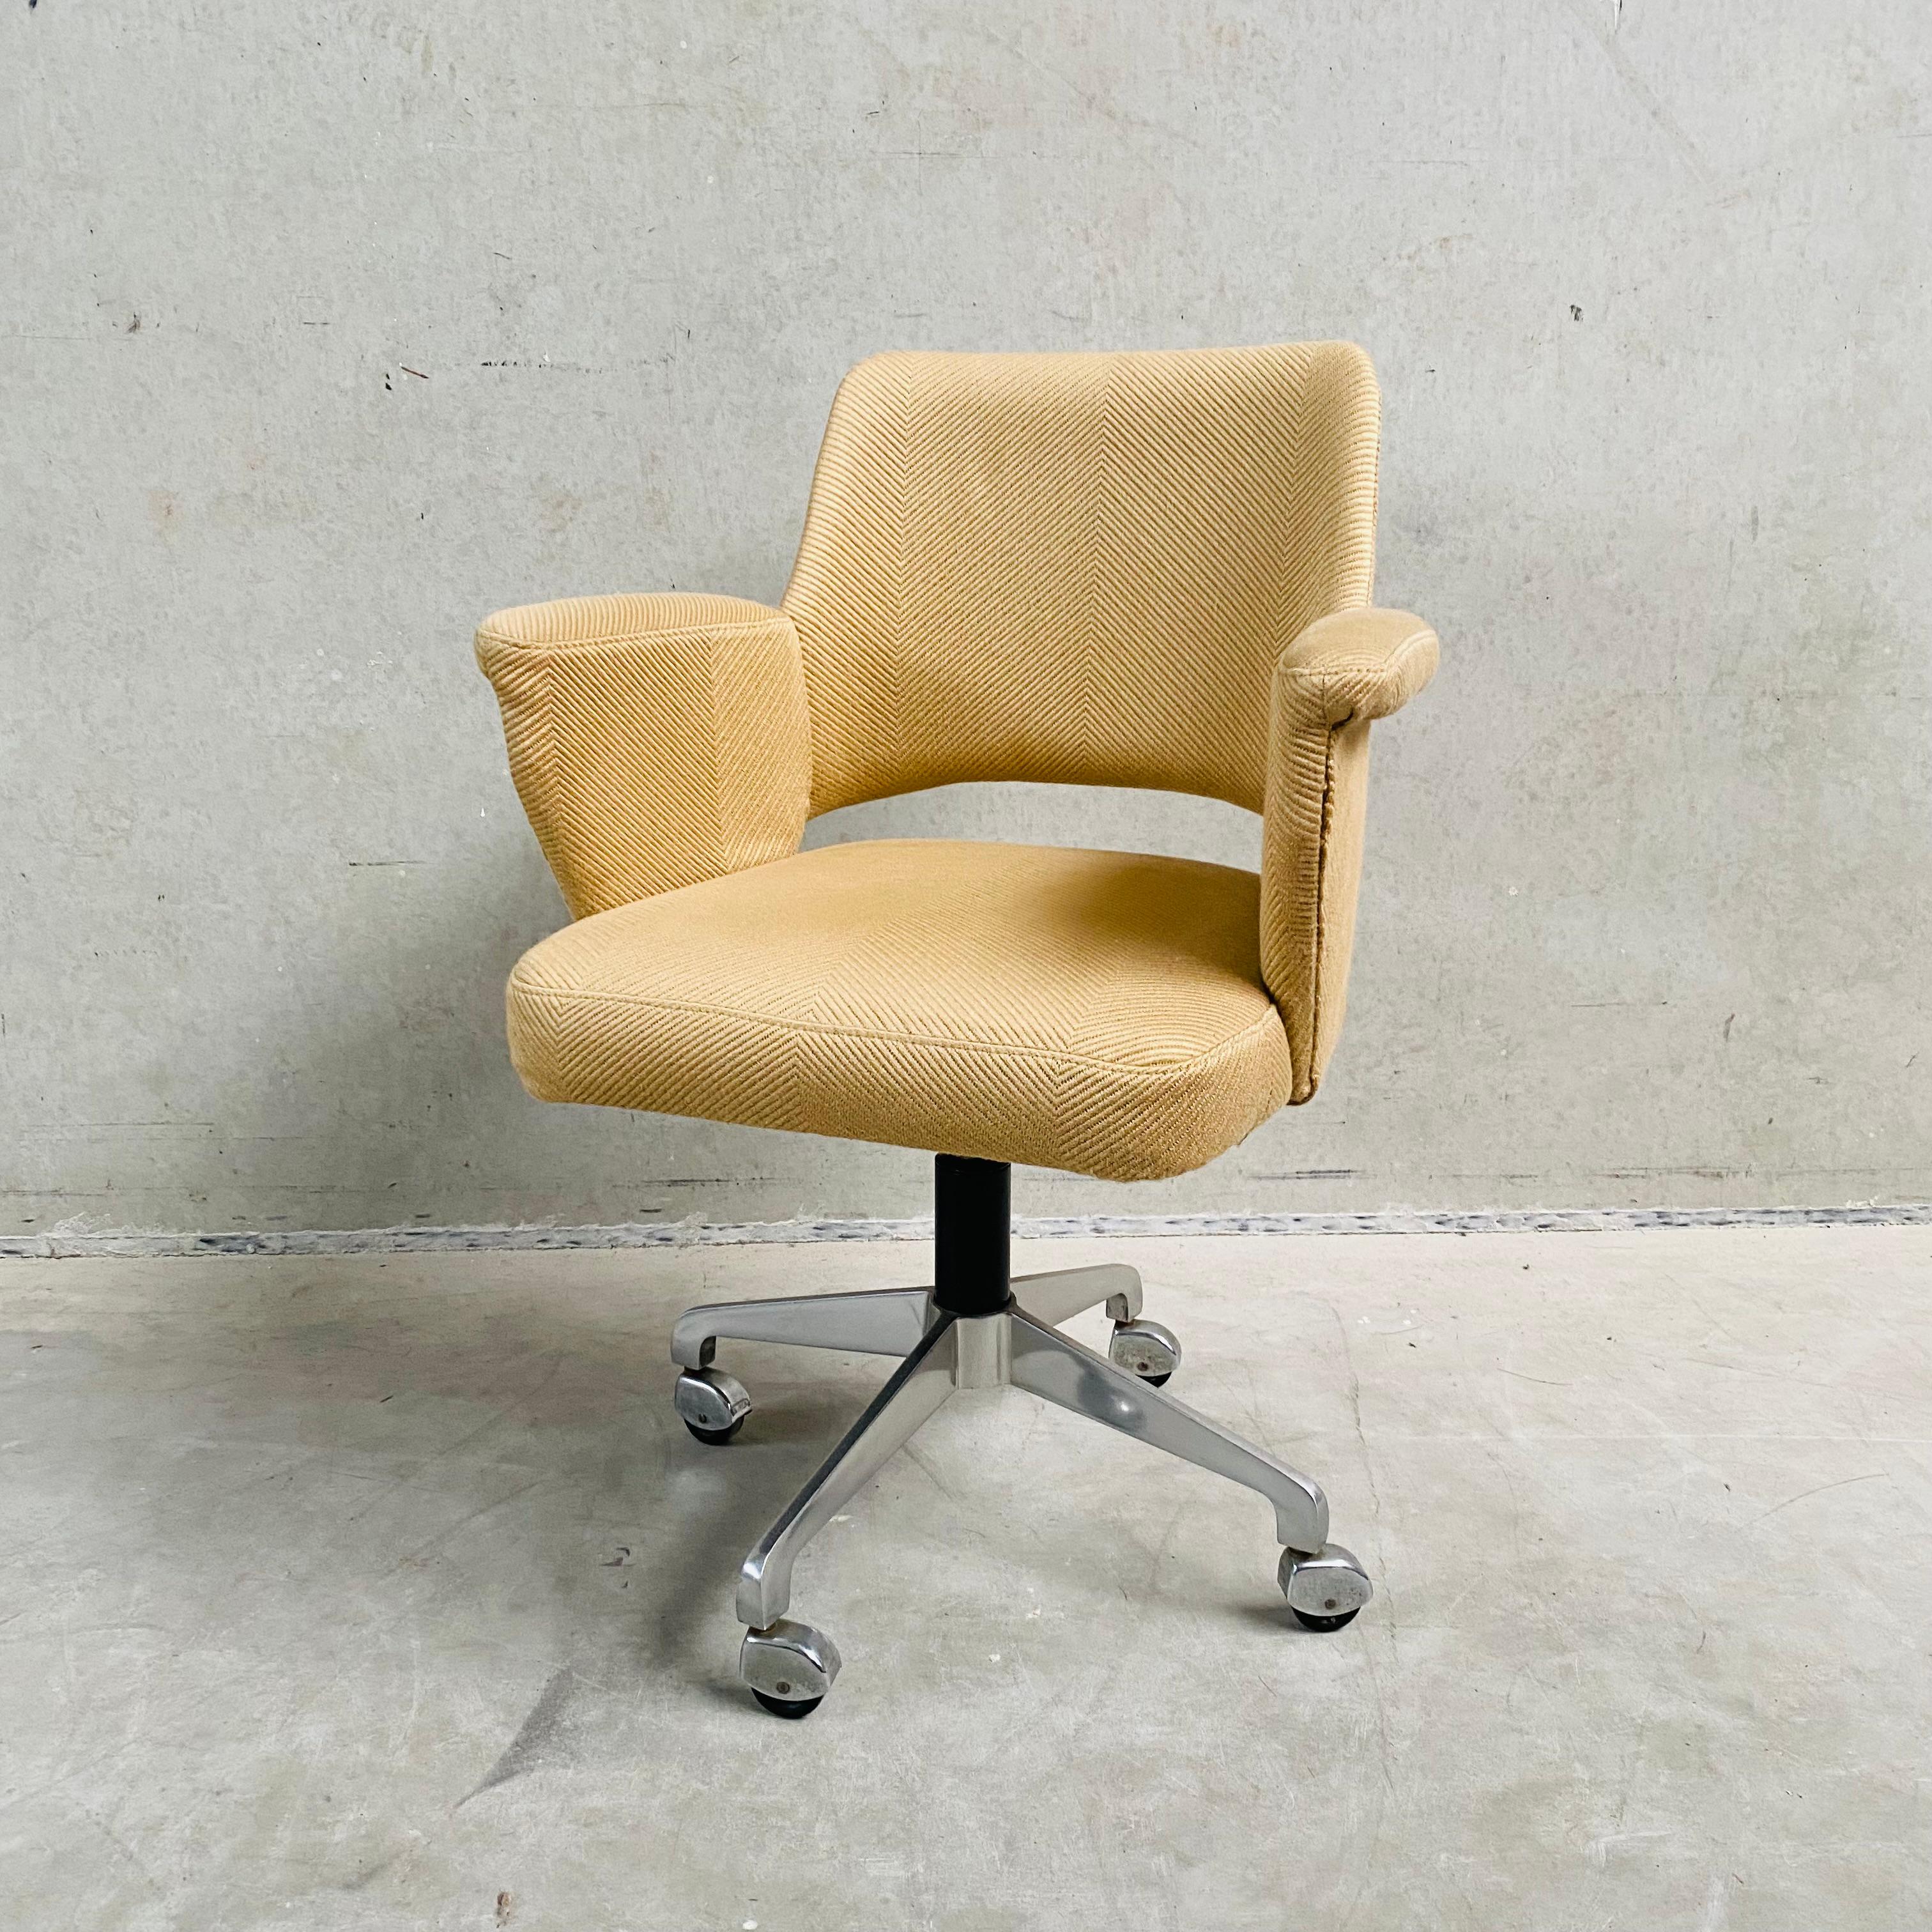 Introducing the Mid-Century Swiffle Desk Chair by Hein Salomonson for AP Originals 1960 – a timeless piece that seamlessly merges iconic design with unparalleled comfort. Crafted with precision and style in mind, this chair showcases the ingenuity